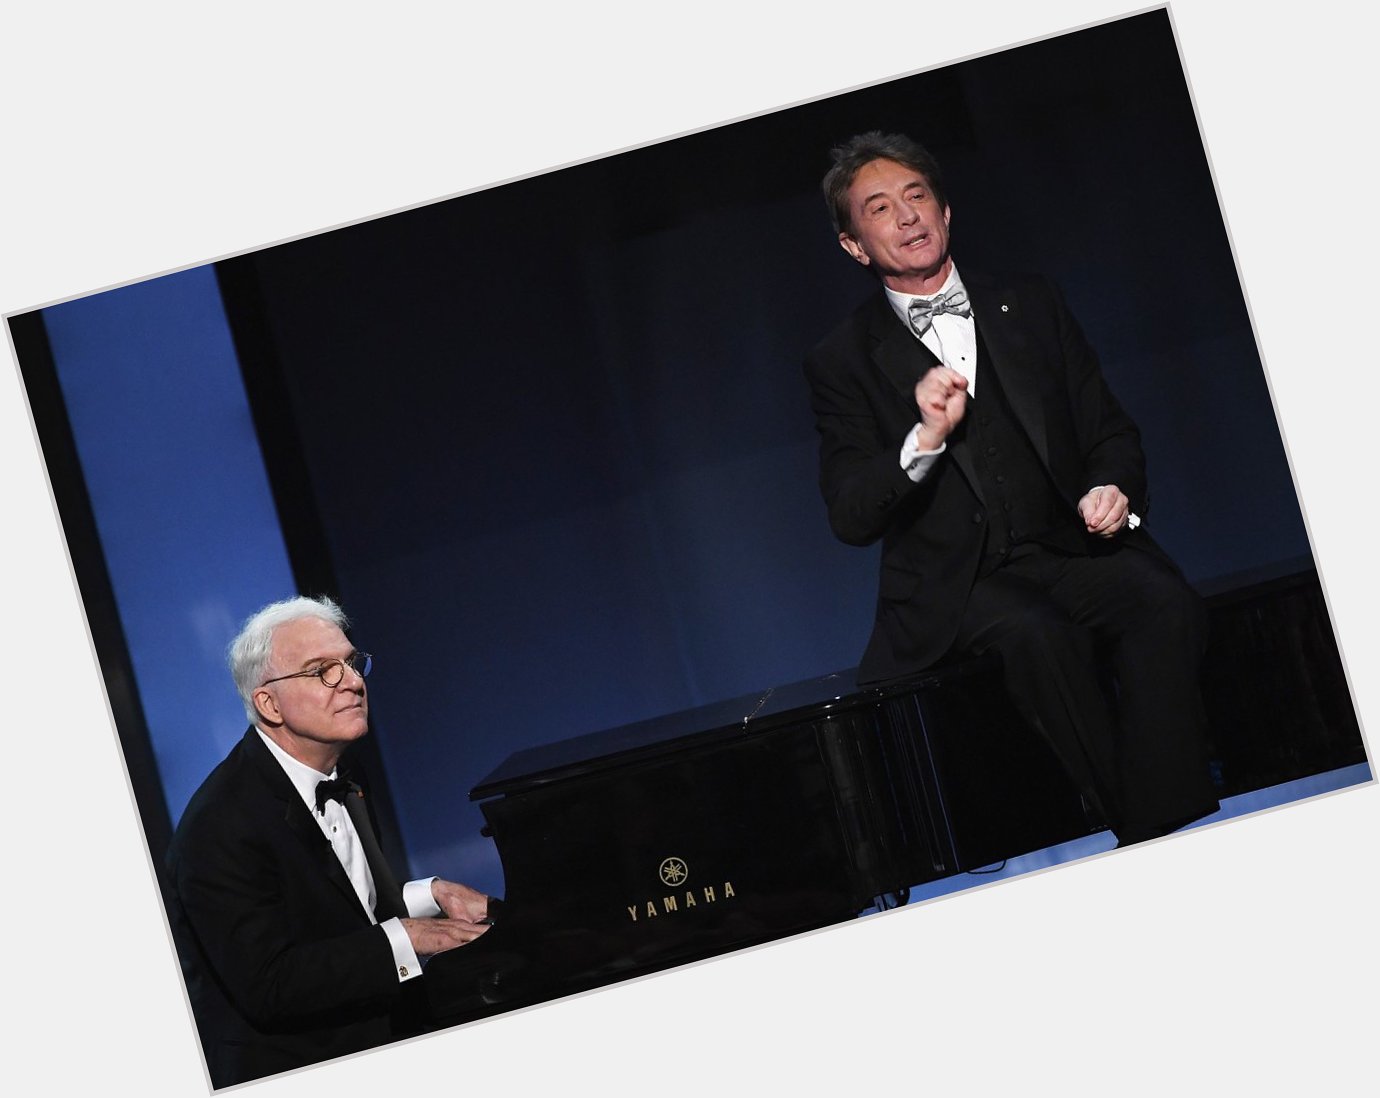 A big Happy Birthday to our friend Martin Short who joined us this past September in Bangor! 